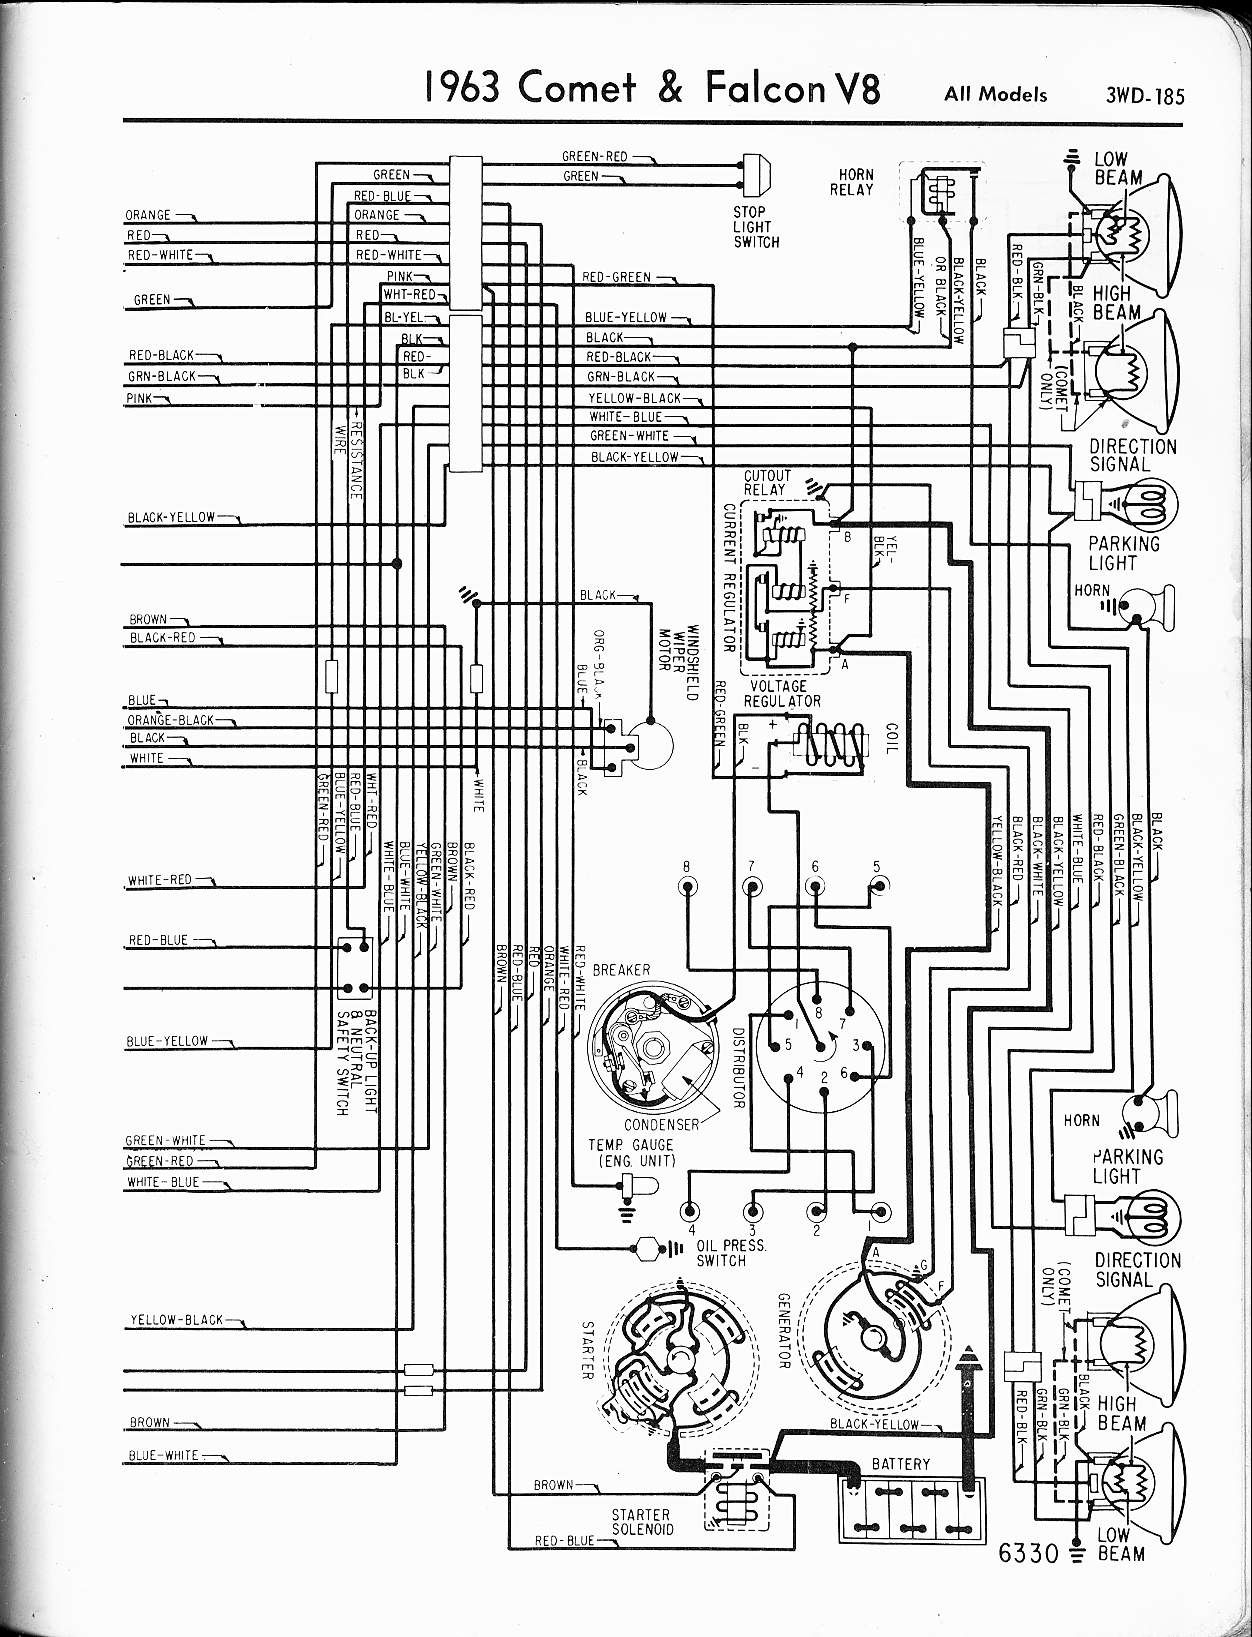 57-65 Ford Wiring Diagrams 1962 Ford Econoline Wiring-Diagram The Old Car Manual Project